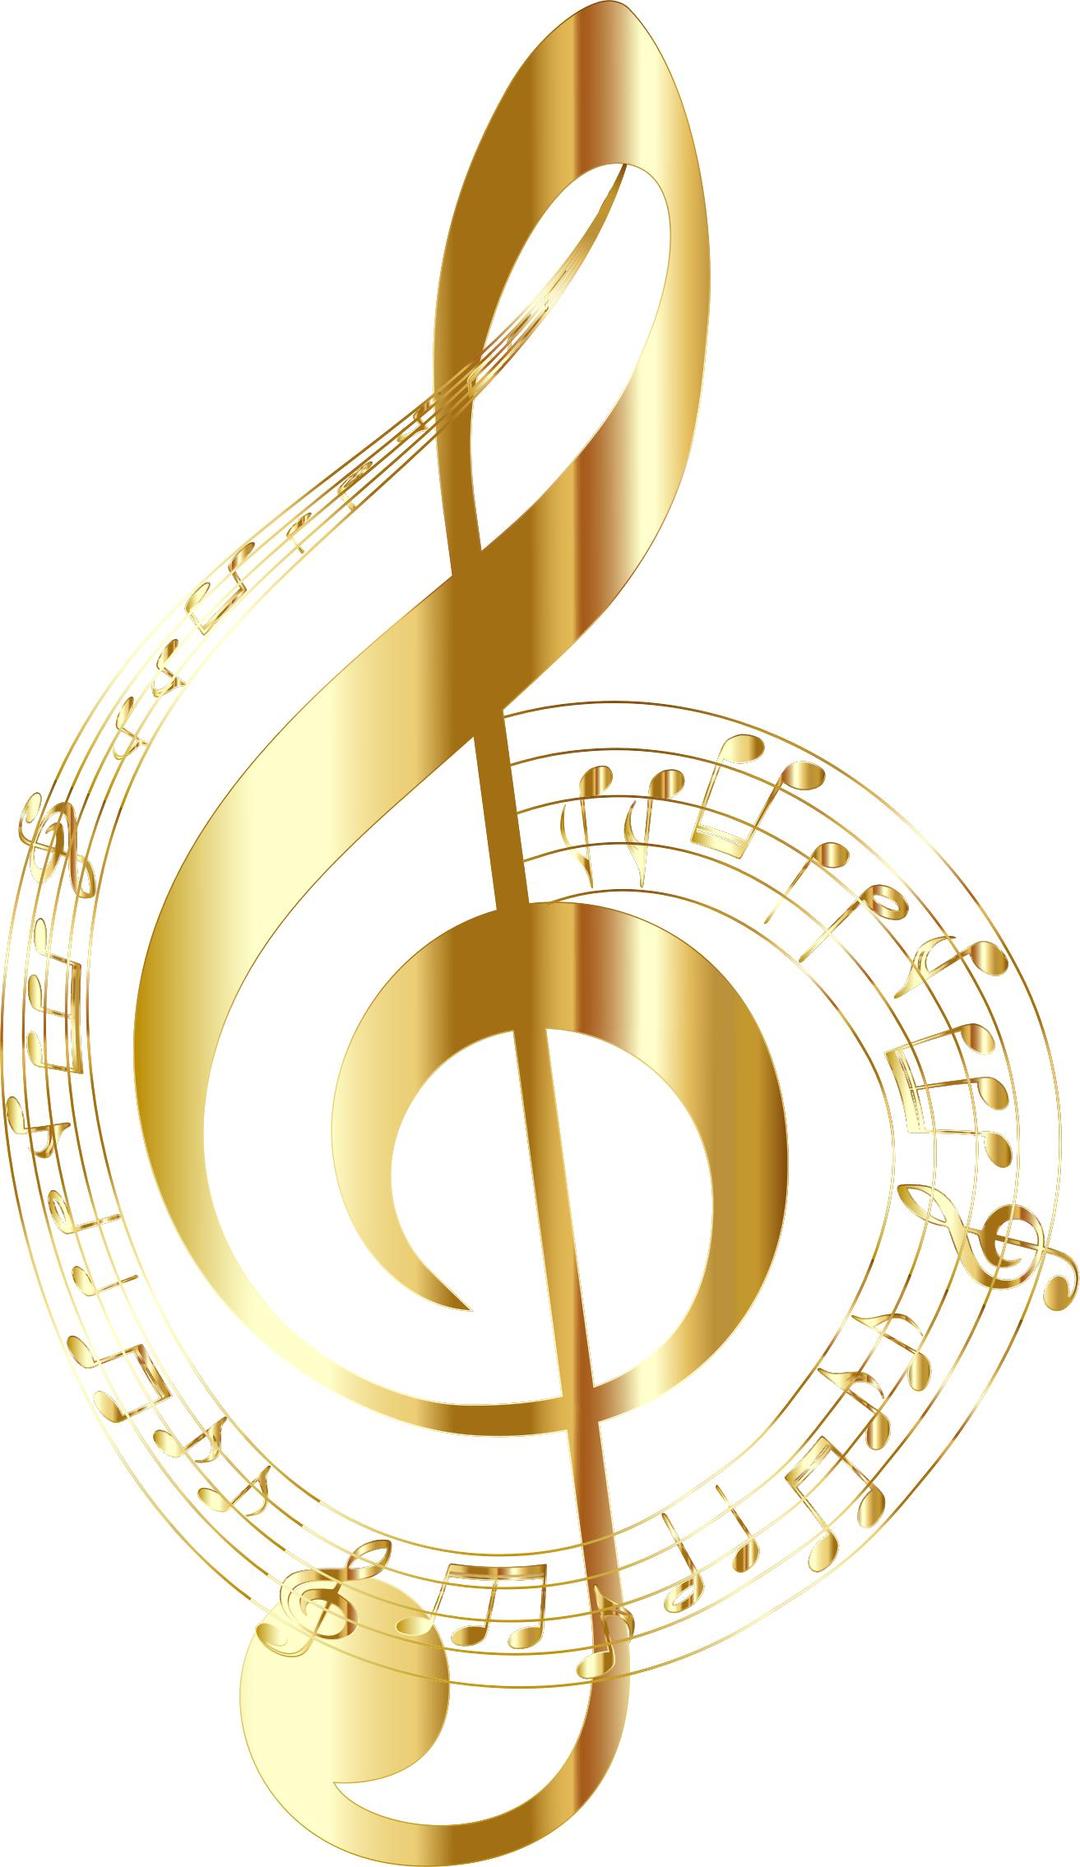 Gold Musical Notes Typography No Background png transparent